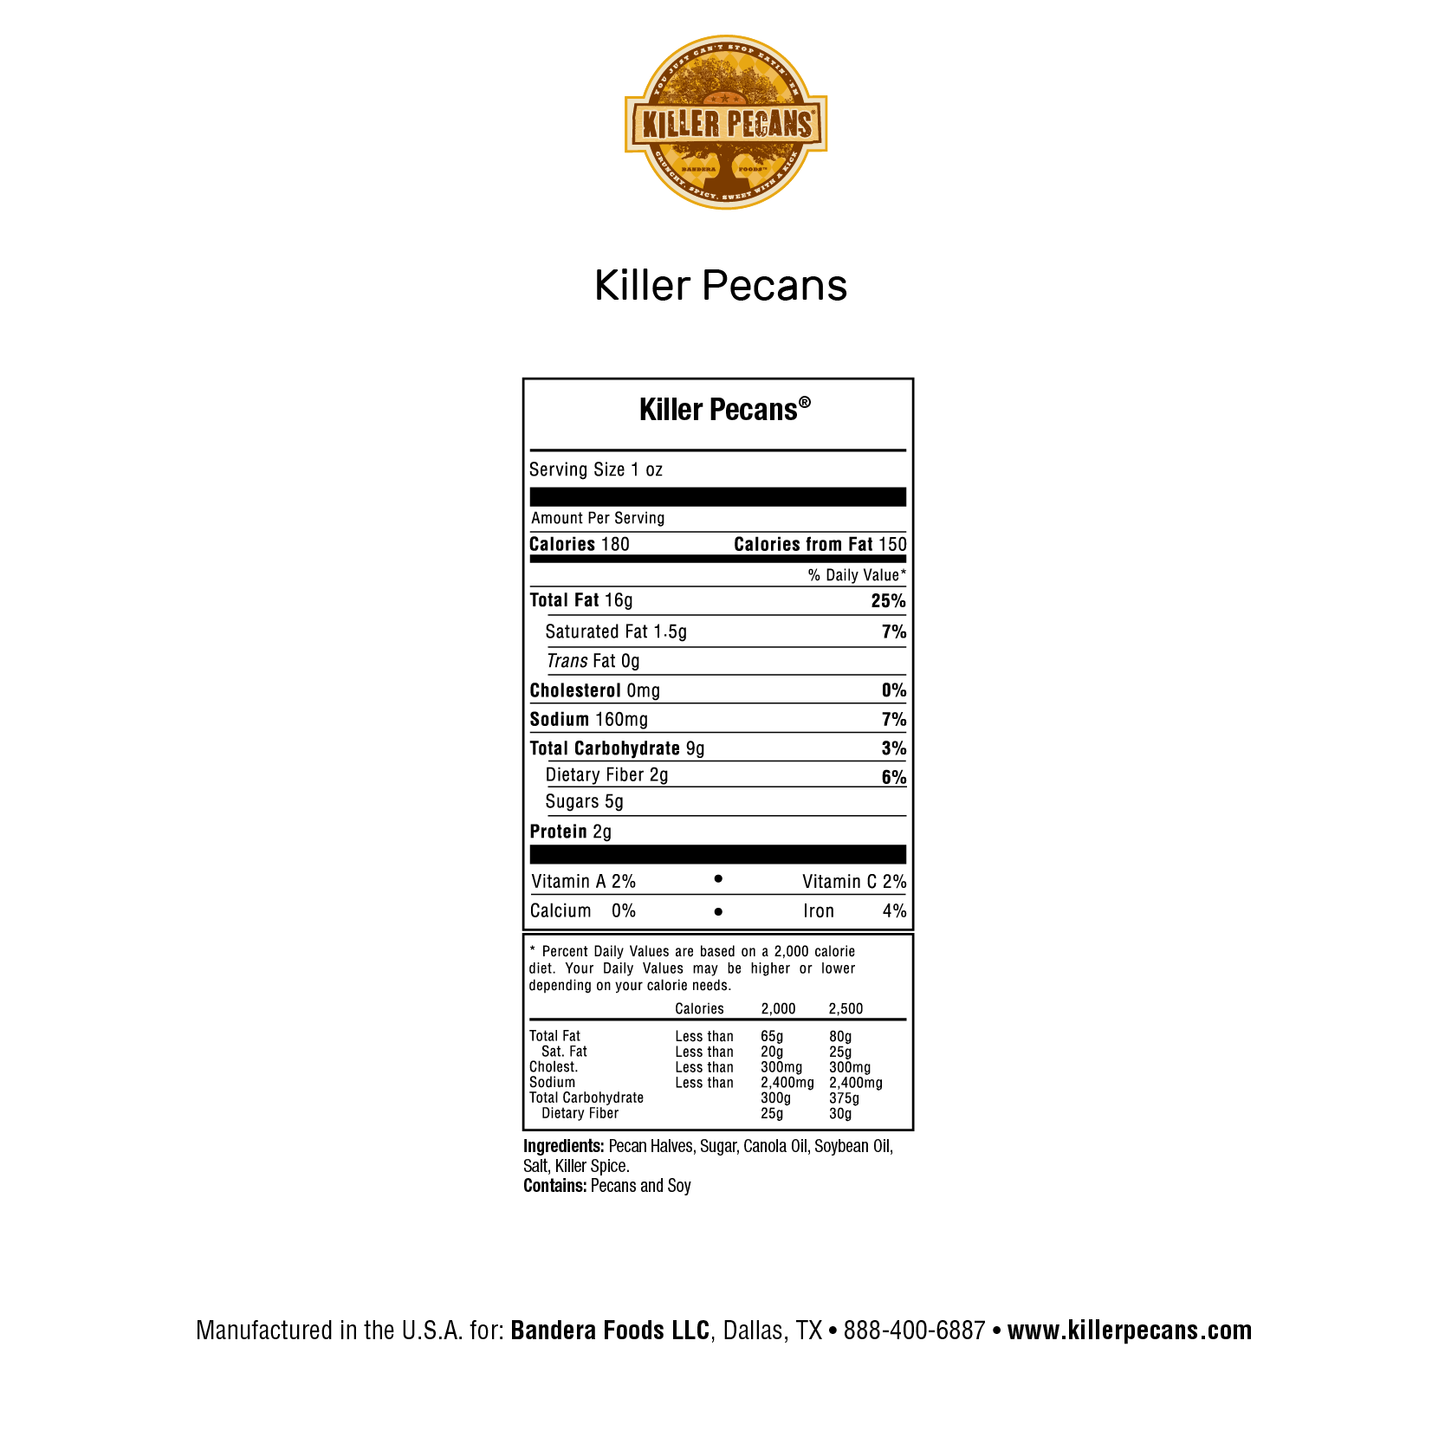 Killer Pecans 8oz bag Crunchy Spicy Sweet with a Kick. All Natural, Gluten-free. Nutrition Panel